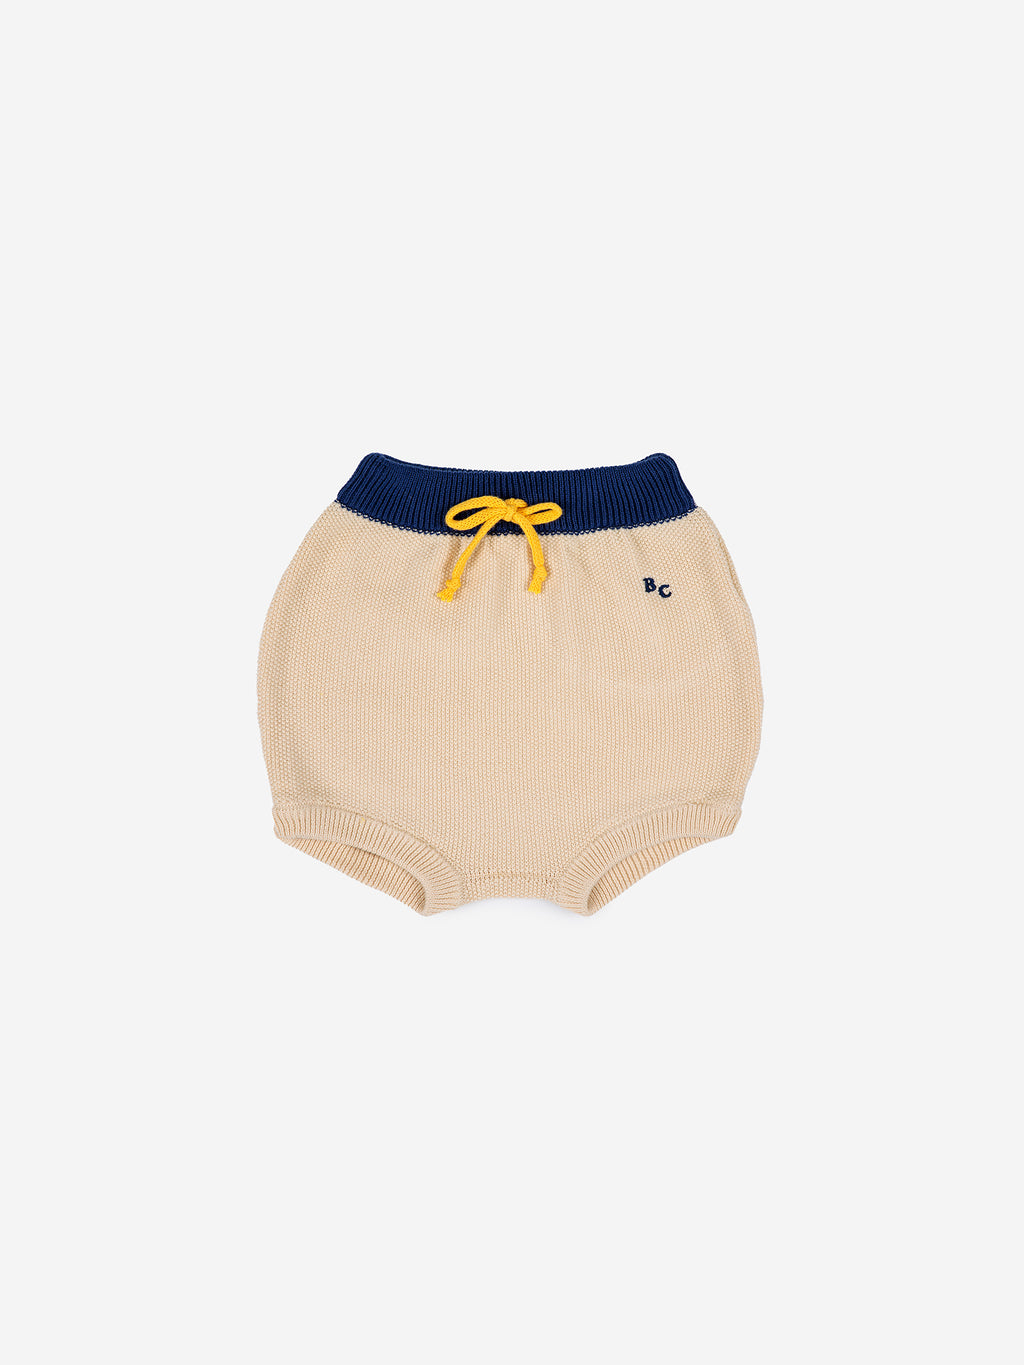 Bobo Choses B.C Sail Rope Knitted Culotte